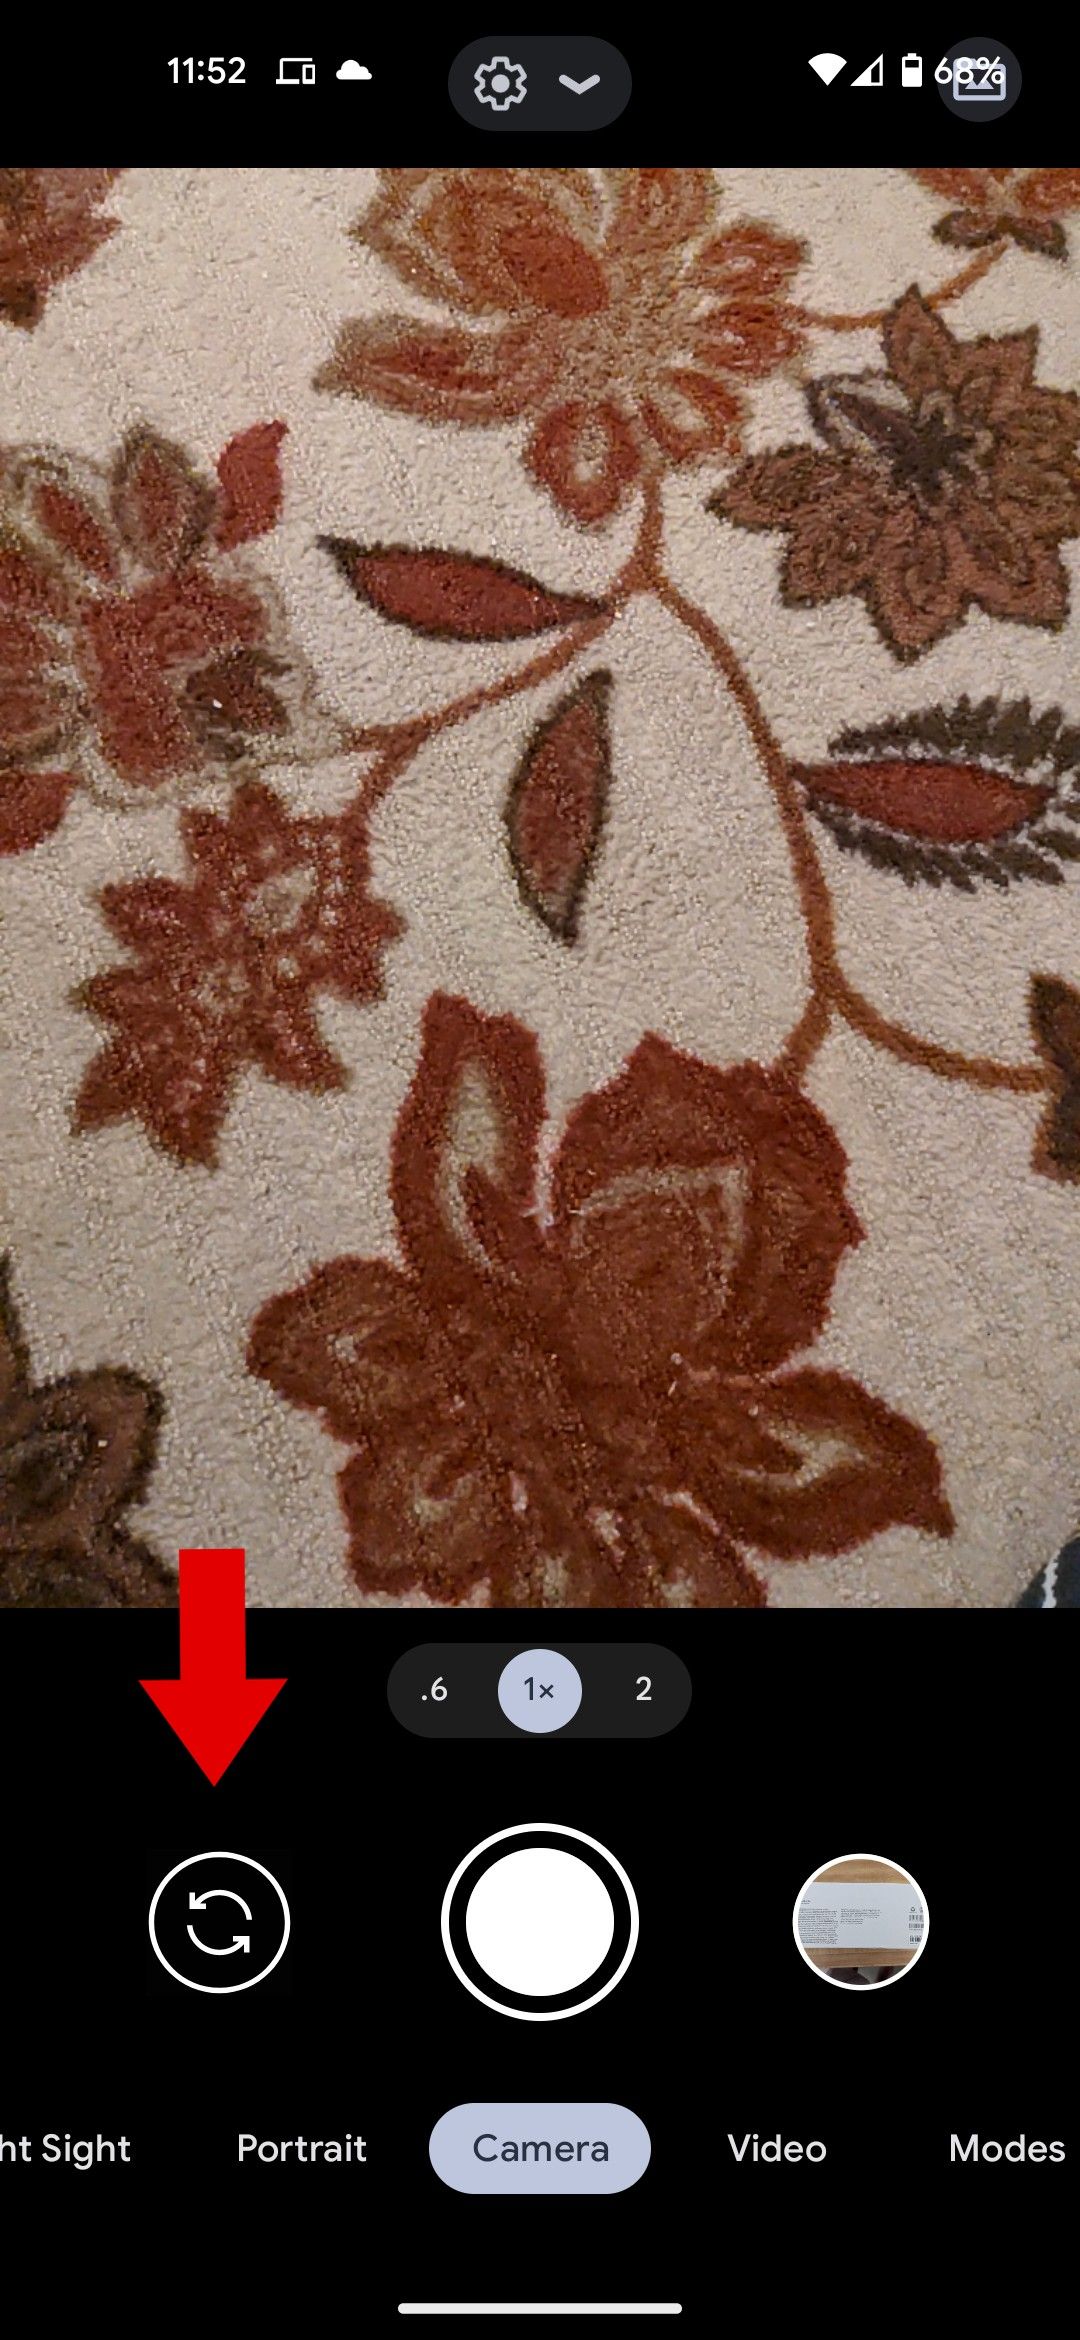 The Google camera app with a red arrow pointing to the camera toggle.